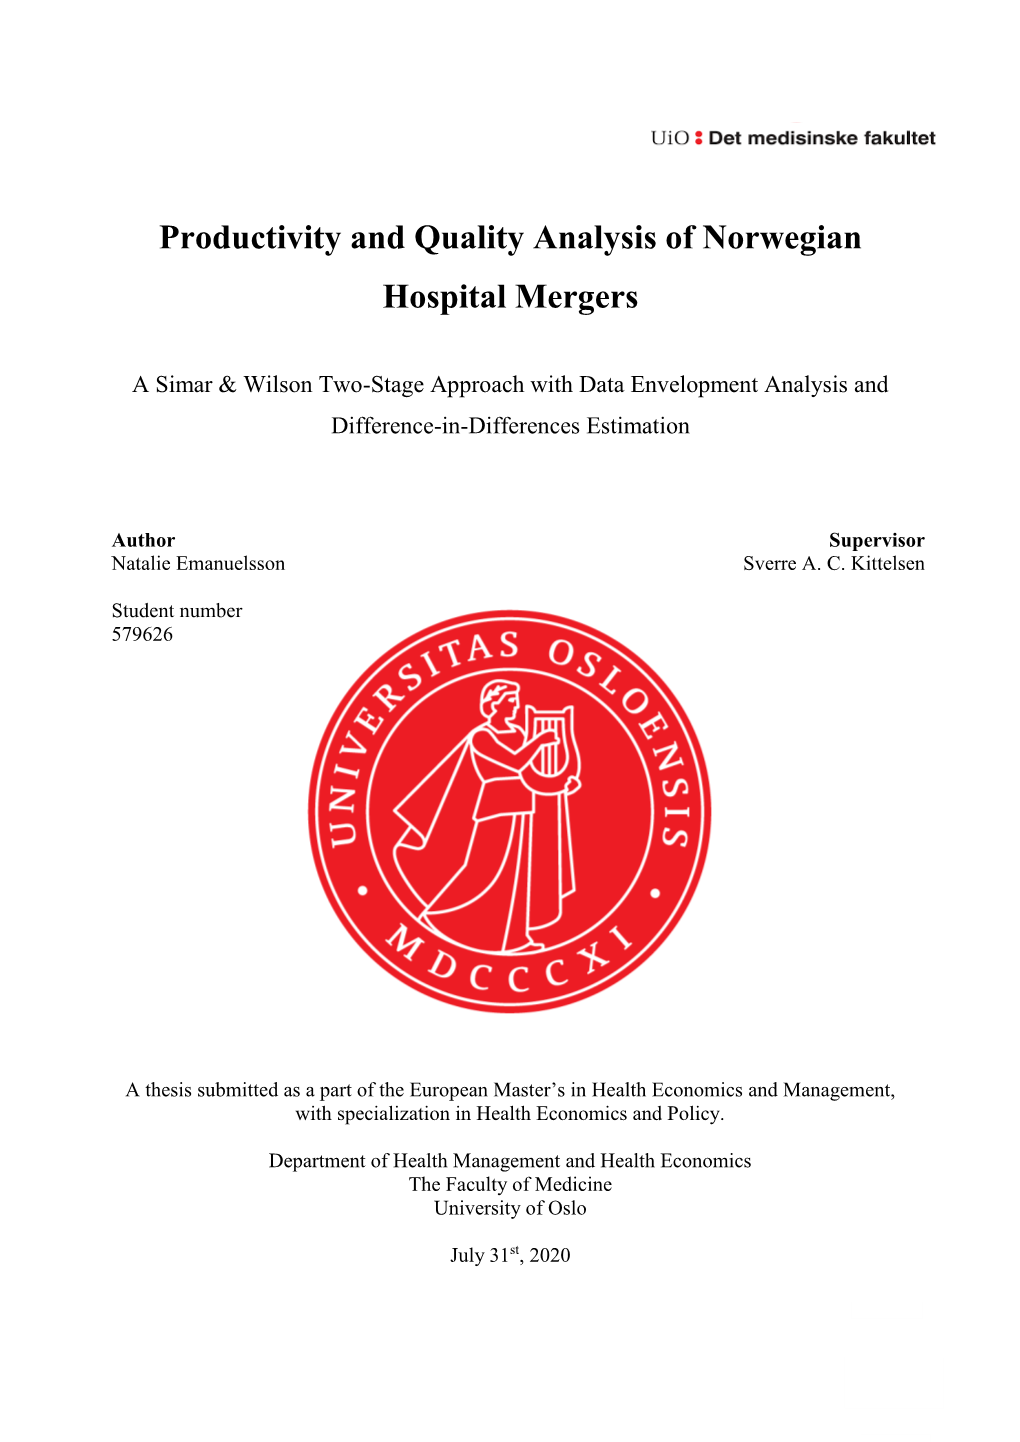 Prductivity and Quality Analysis of Norwegian Hospital Mergers